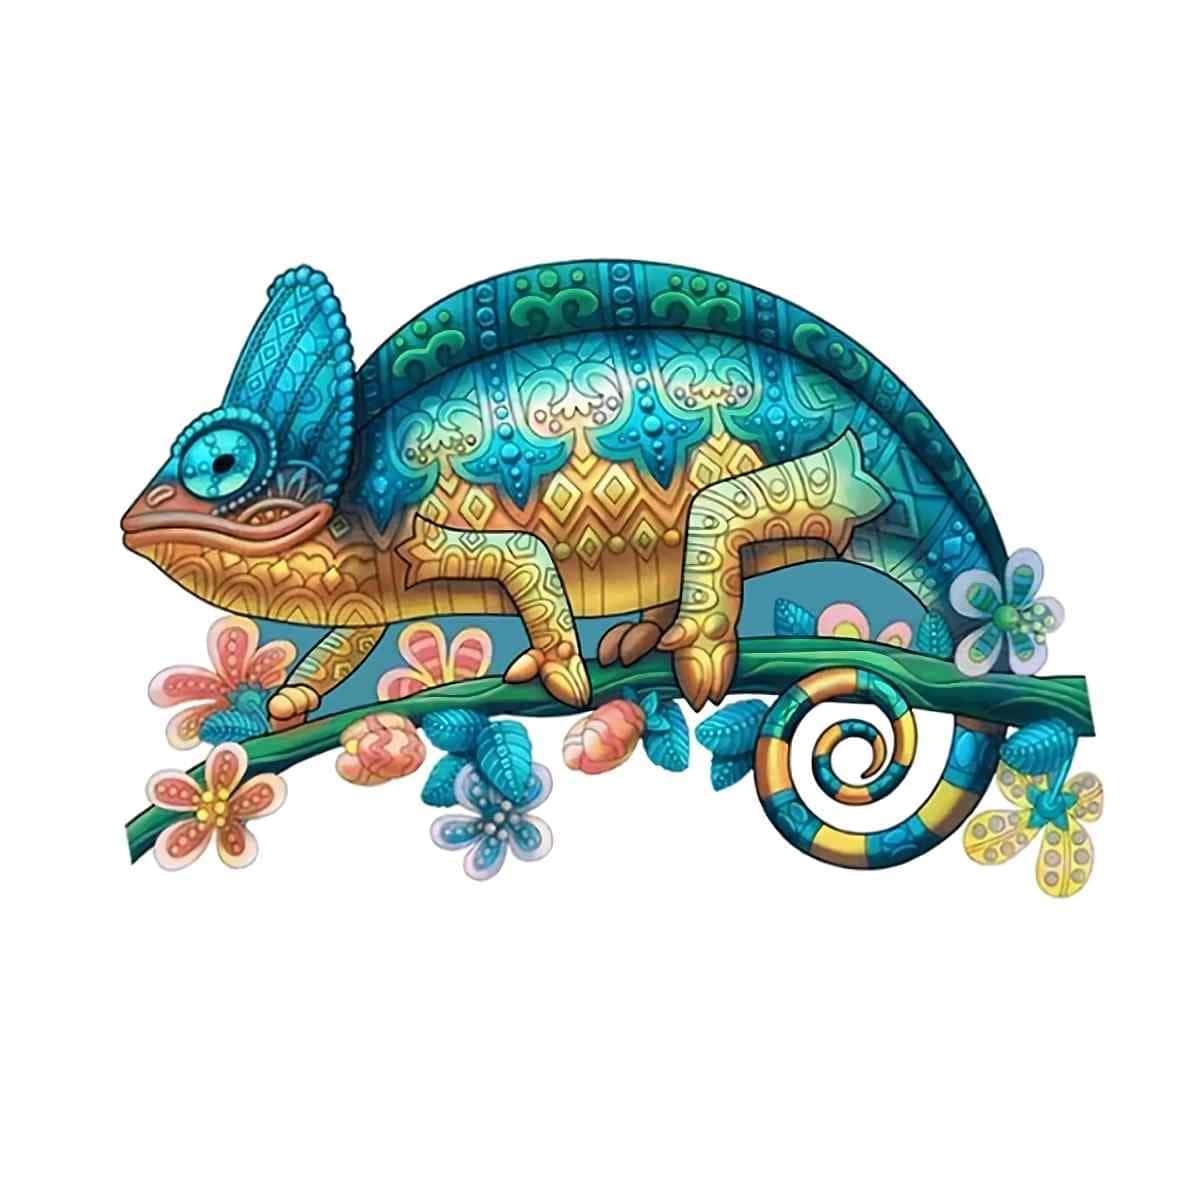 A5 Chameleon - Jigsaw Puzzle